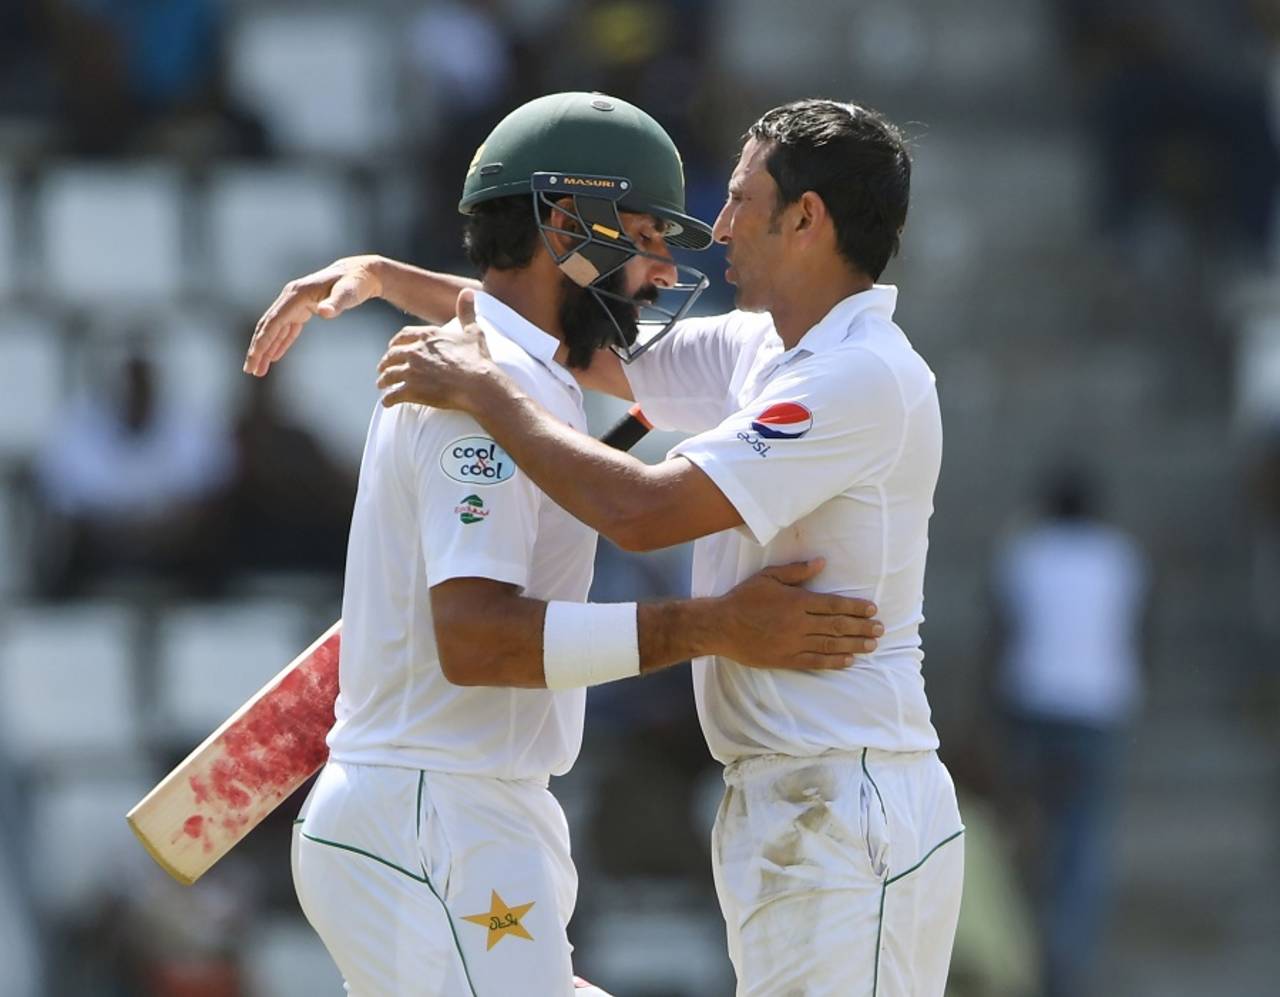 Misbah-ul-Haq is pulled into an embrace by team-mate Younis Khan after being dismissed in his final Test innings, West Indies v Pakistan, 3rd Test, Roseau, 4th day, May 13, 2017